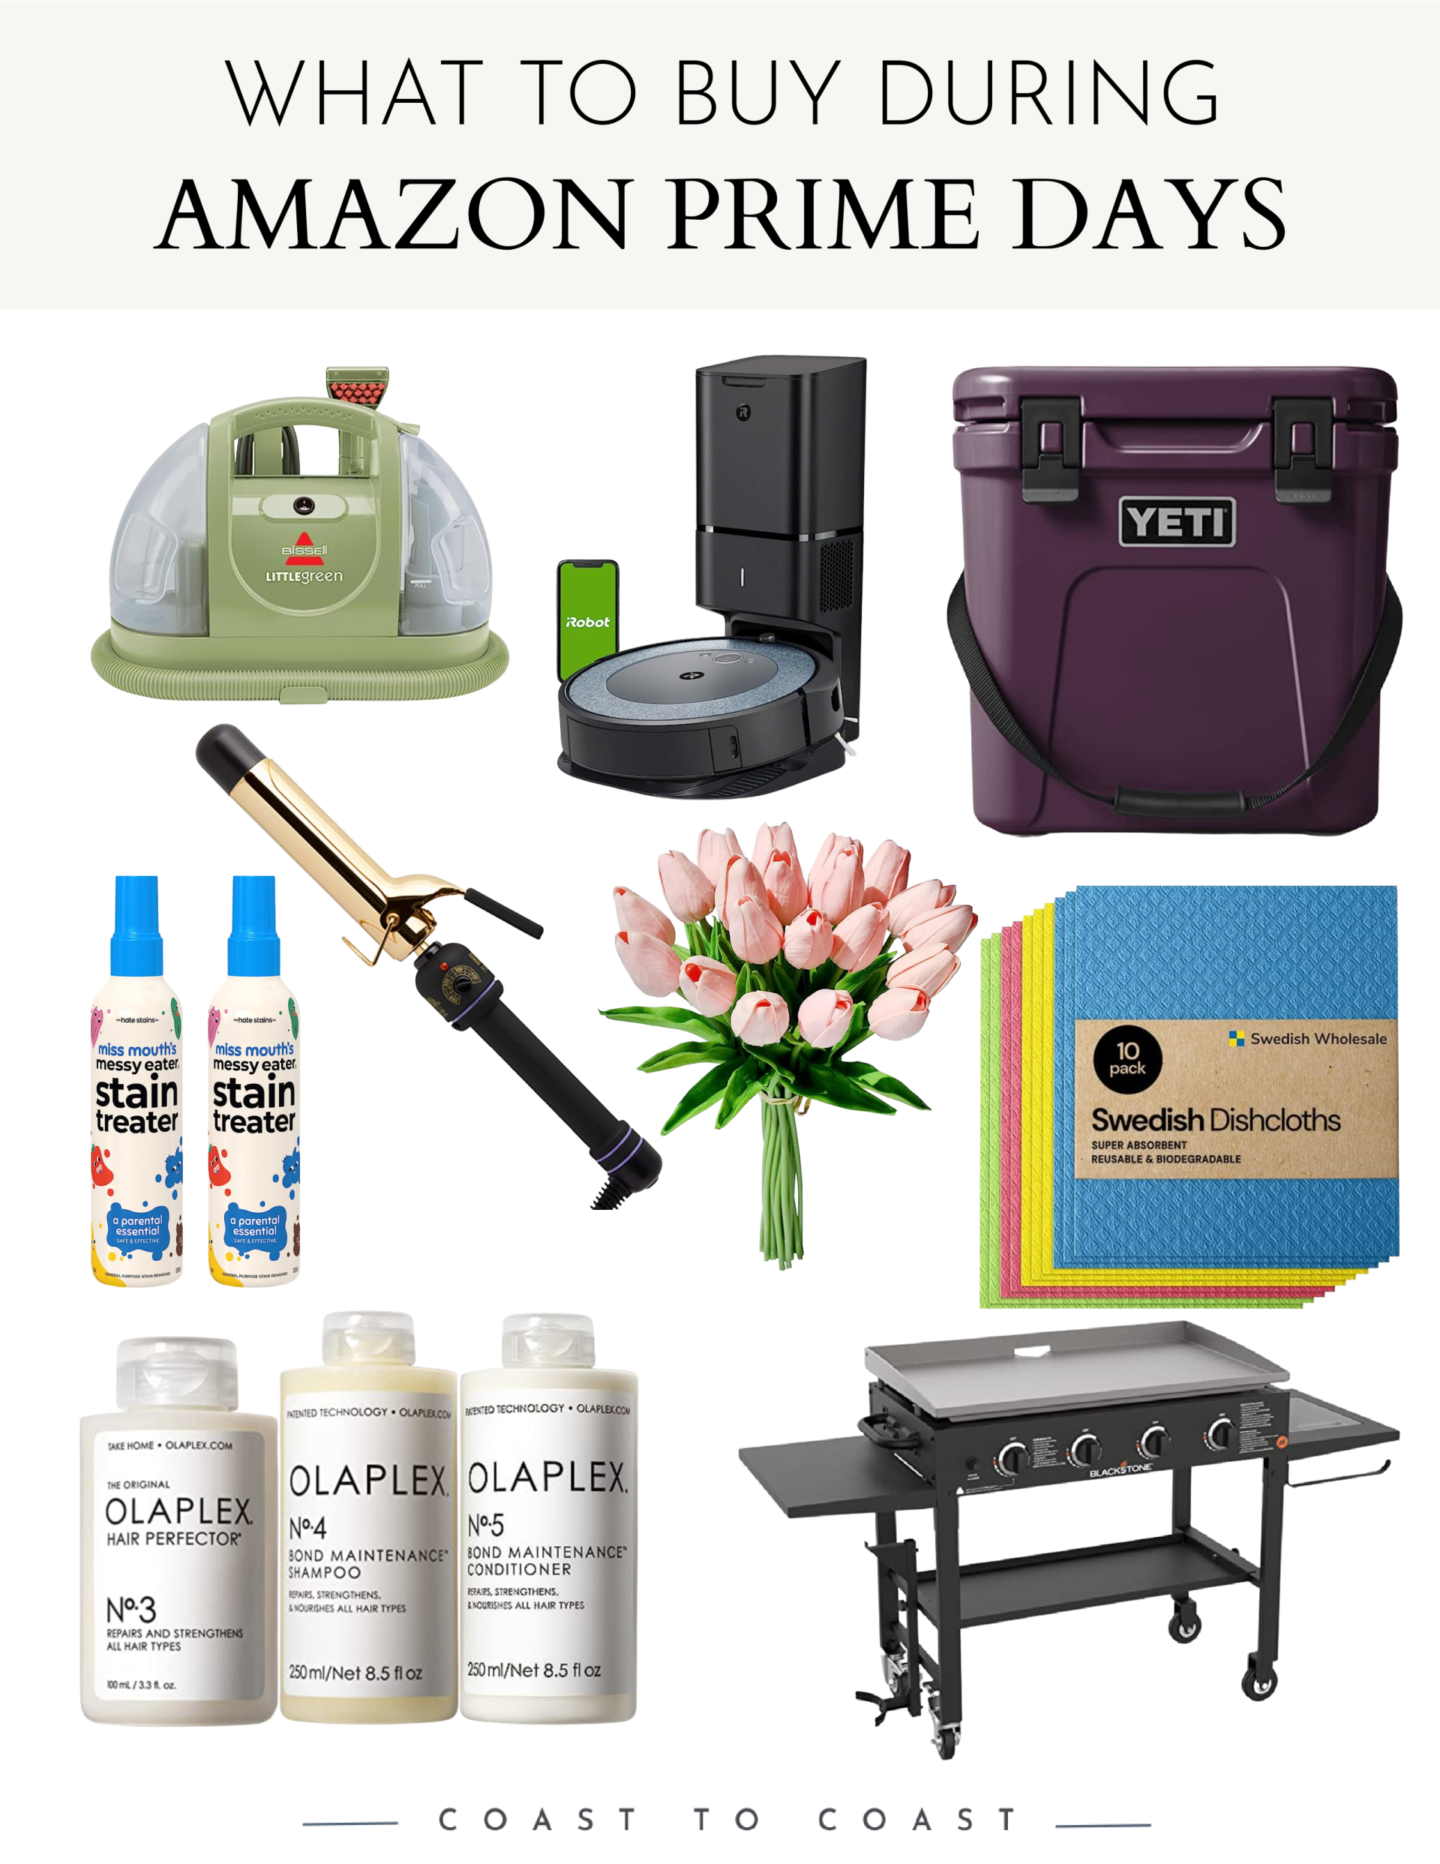 what to buy during Amazon Prime Days